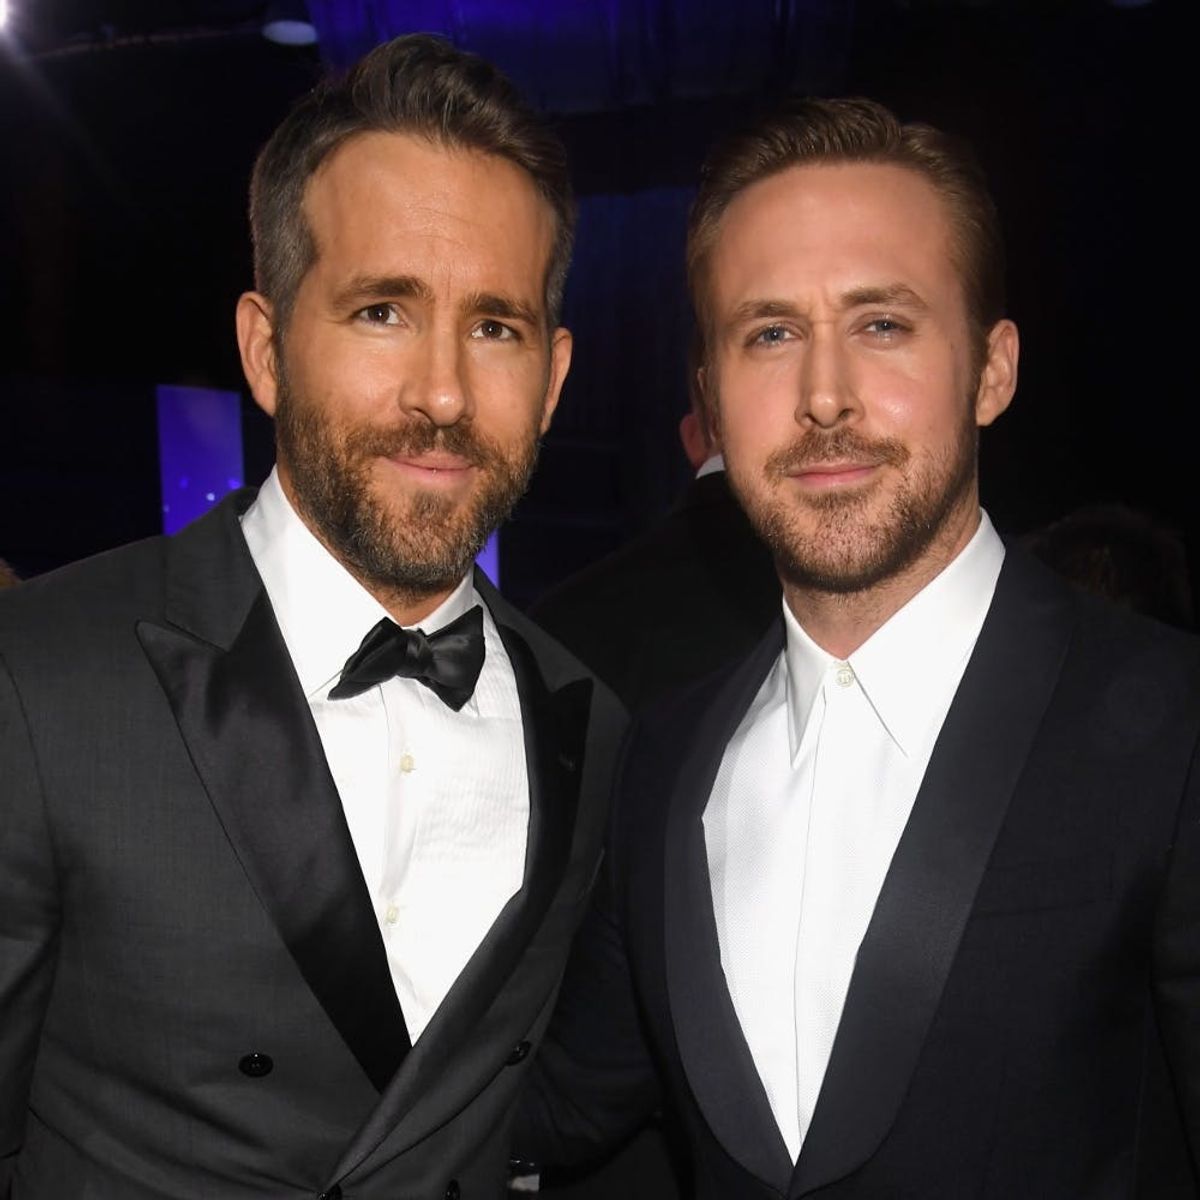 Ryan Reynolds & Ryan Gosling Posing Together Will Put Your Crushes into Overload